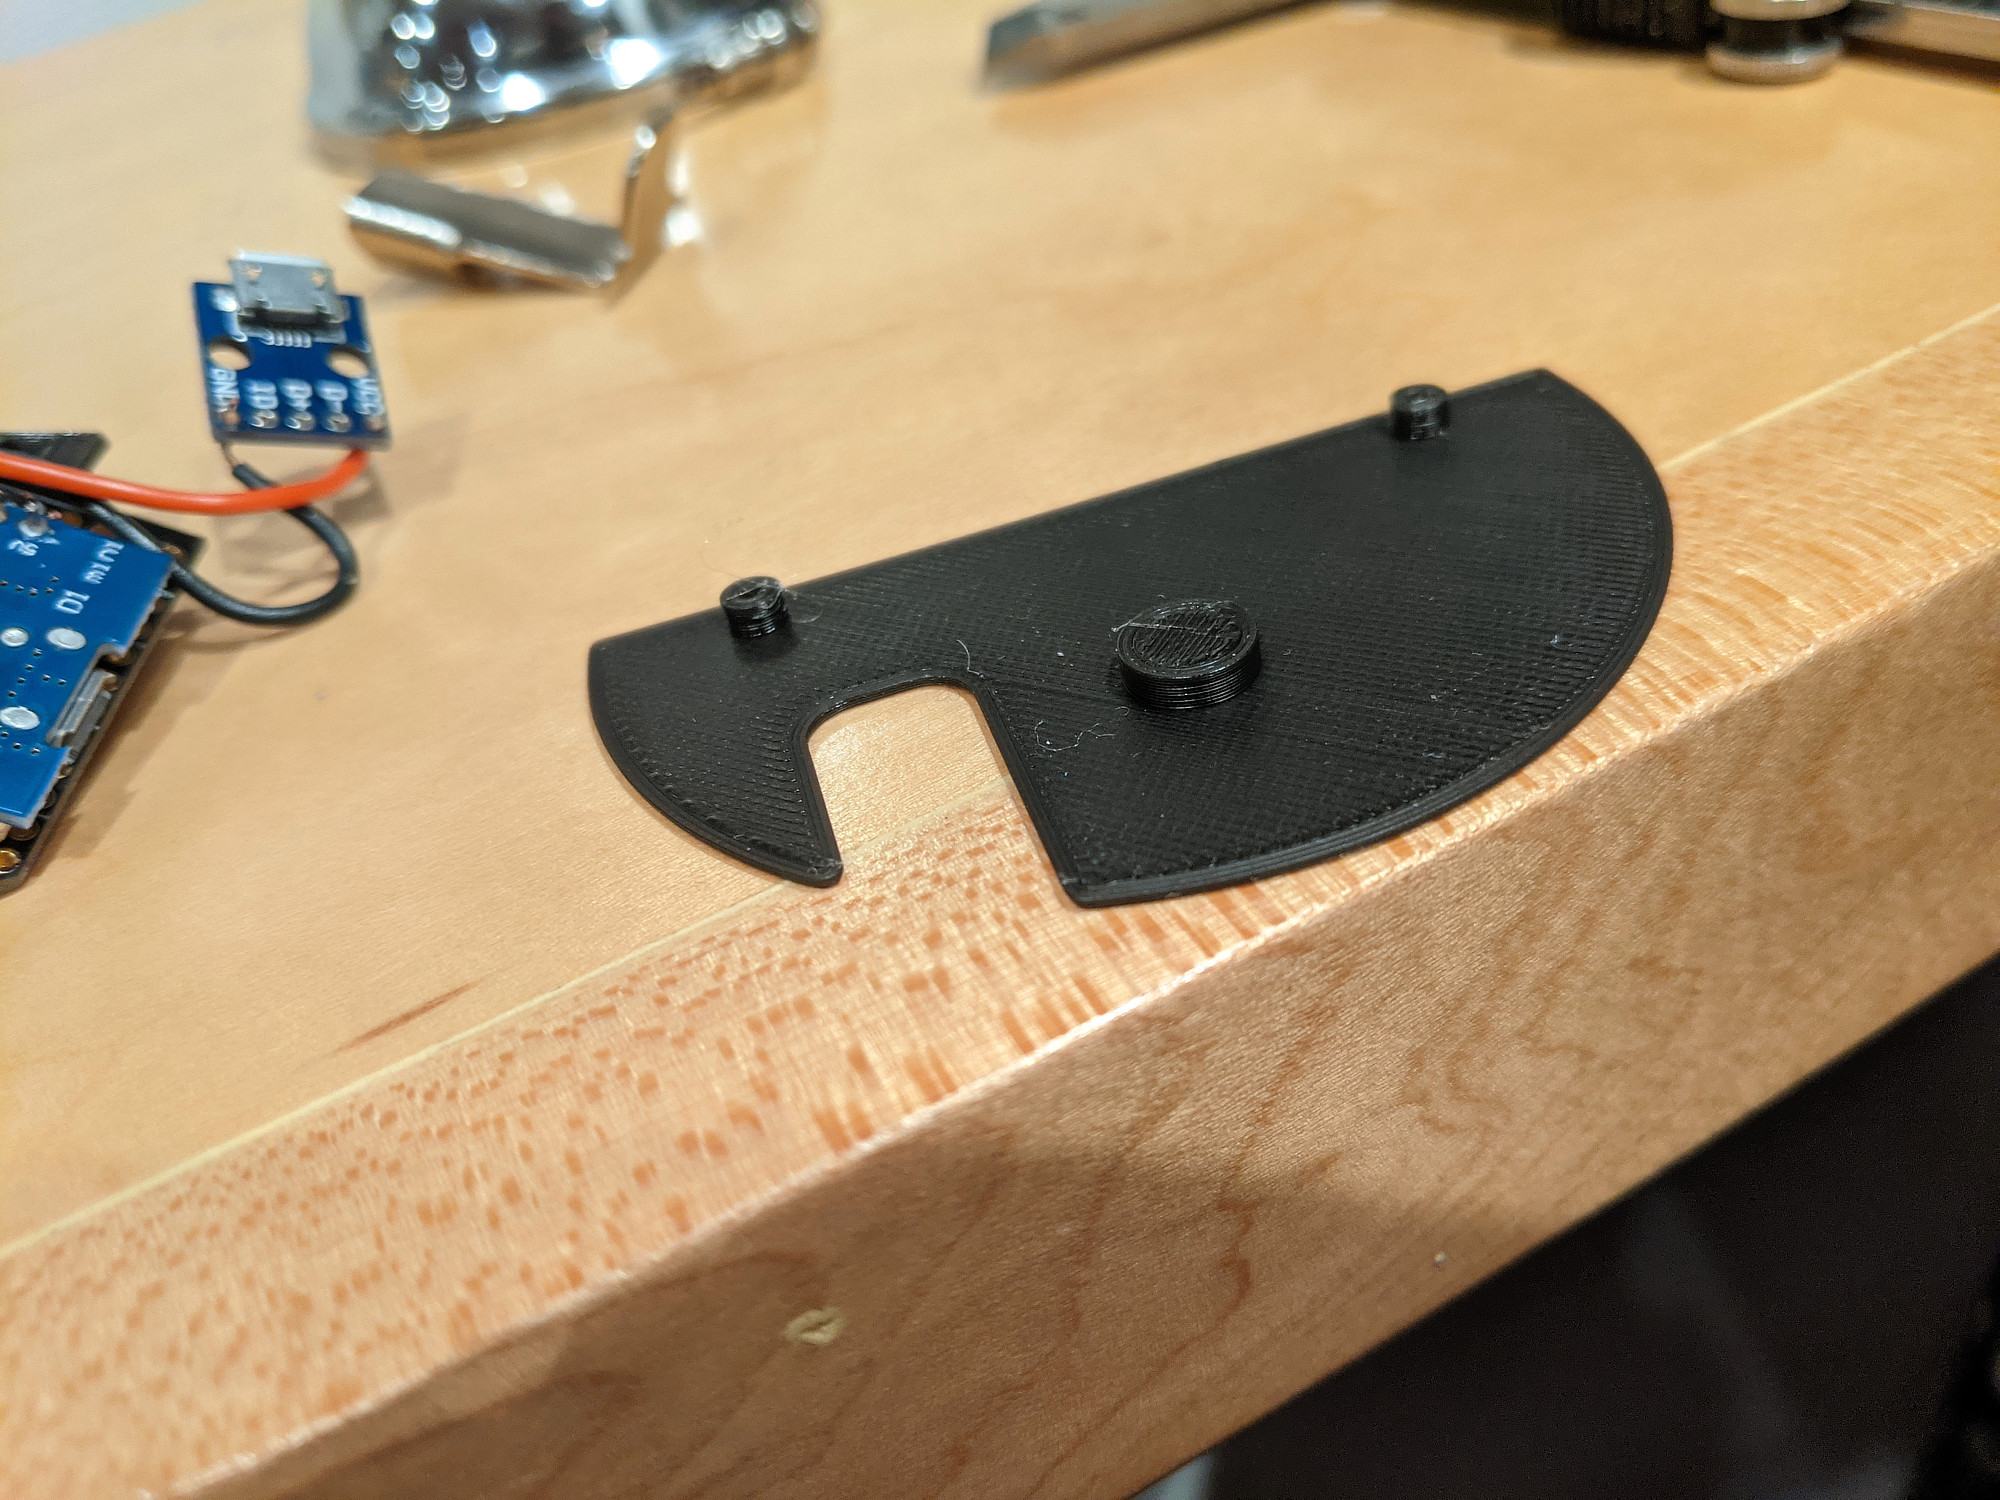 Small mounting plate for the board